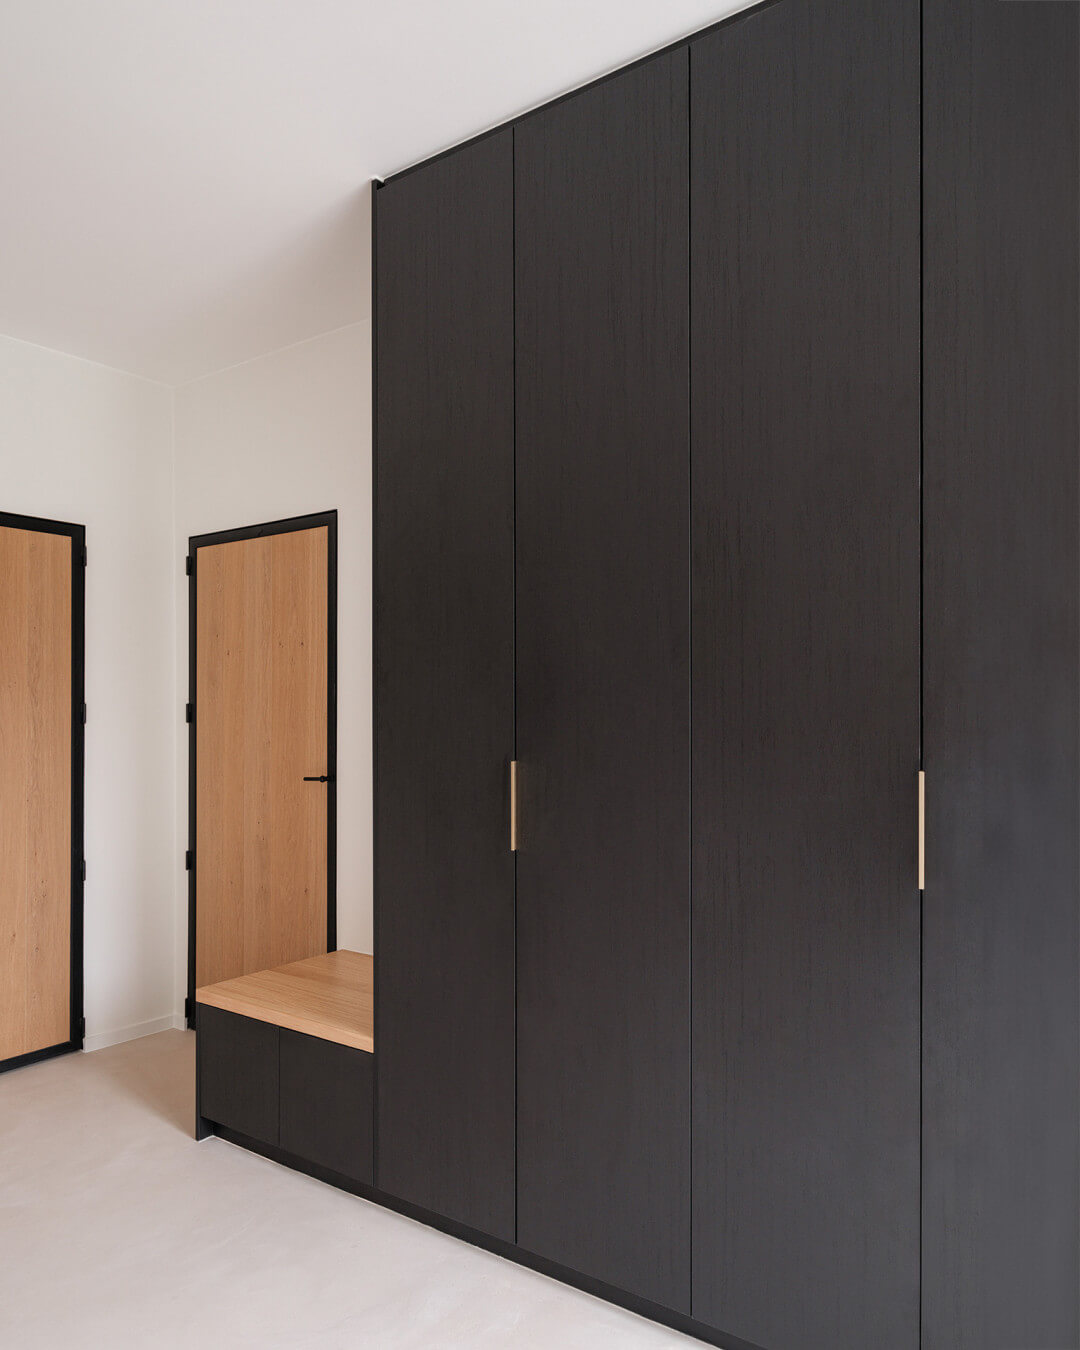 Made-to-measure wardrobe with bench in the hallway